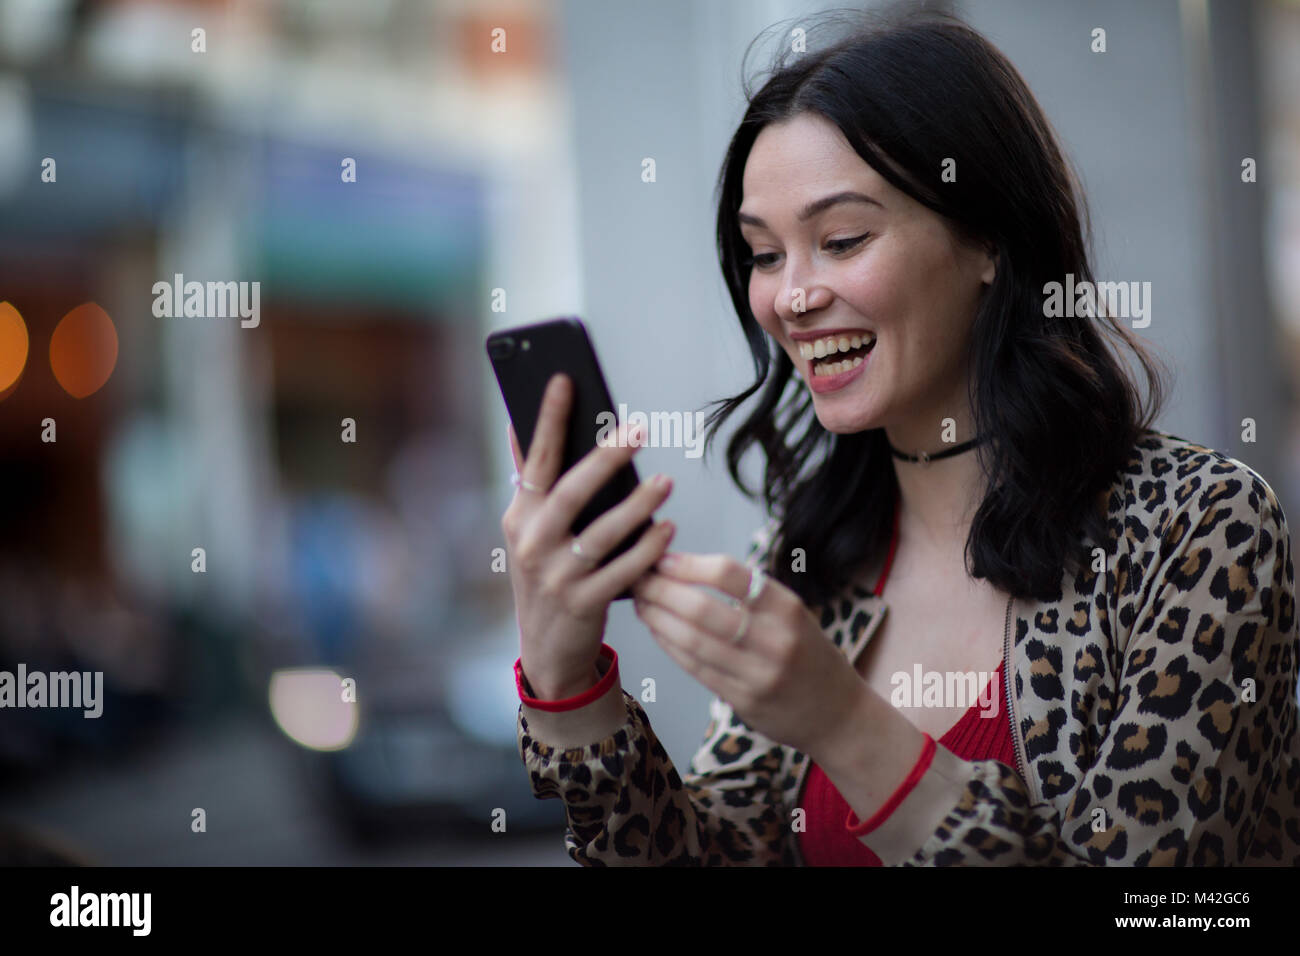 Young adult female on a video call with friend outdoors Stock Photo